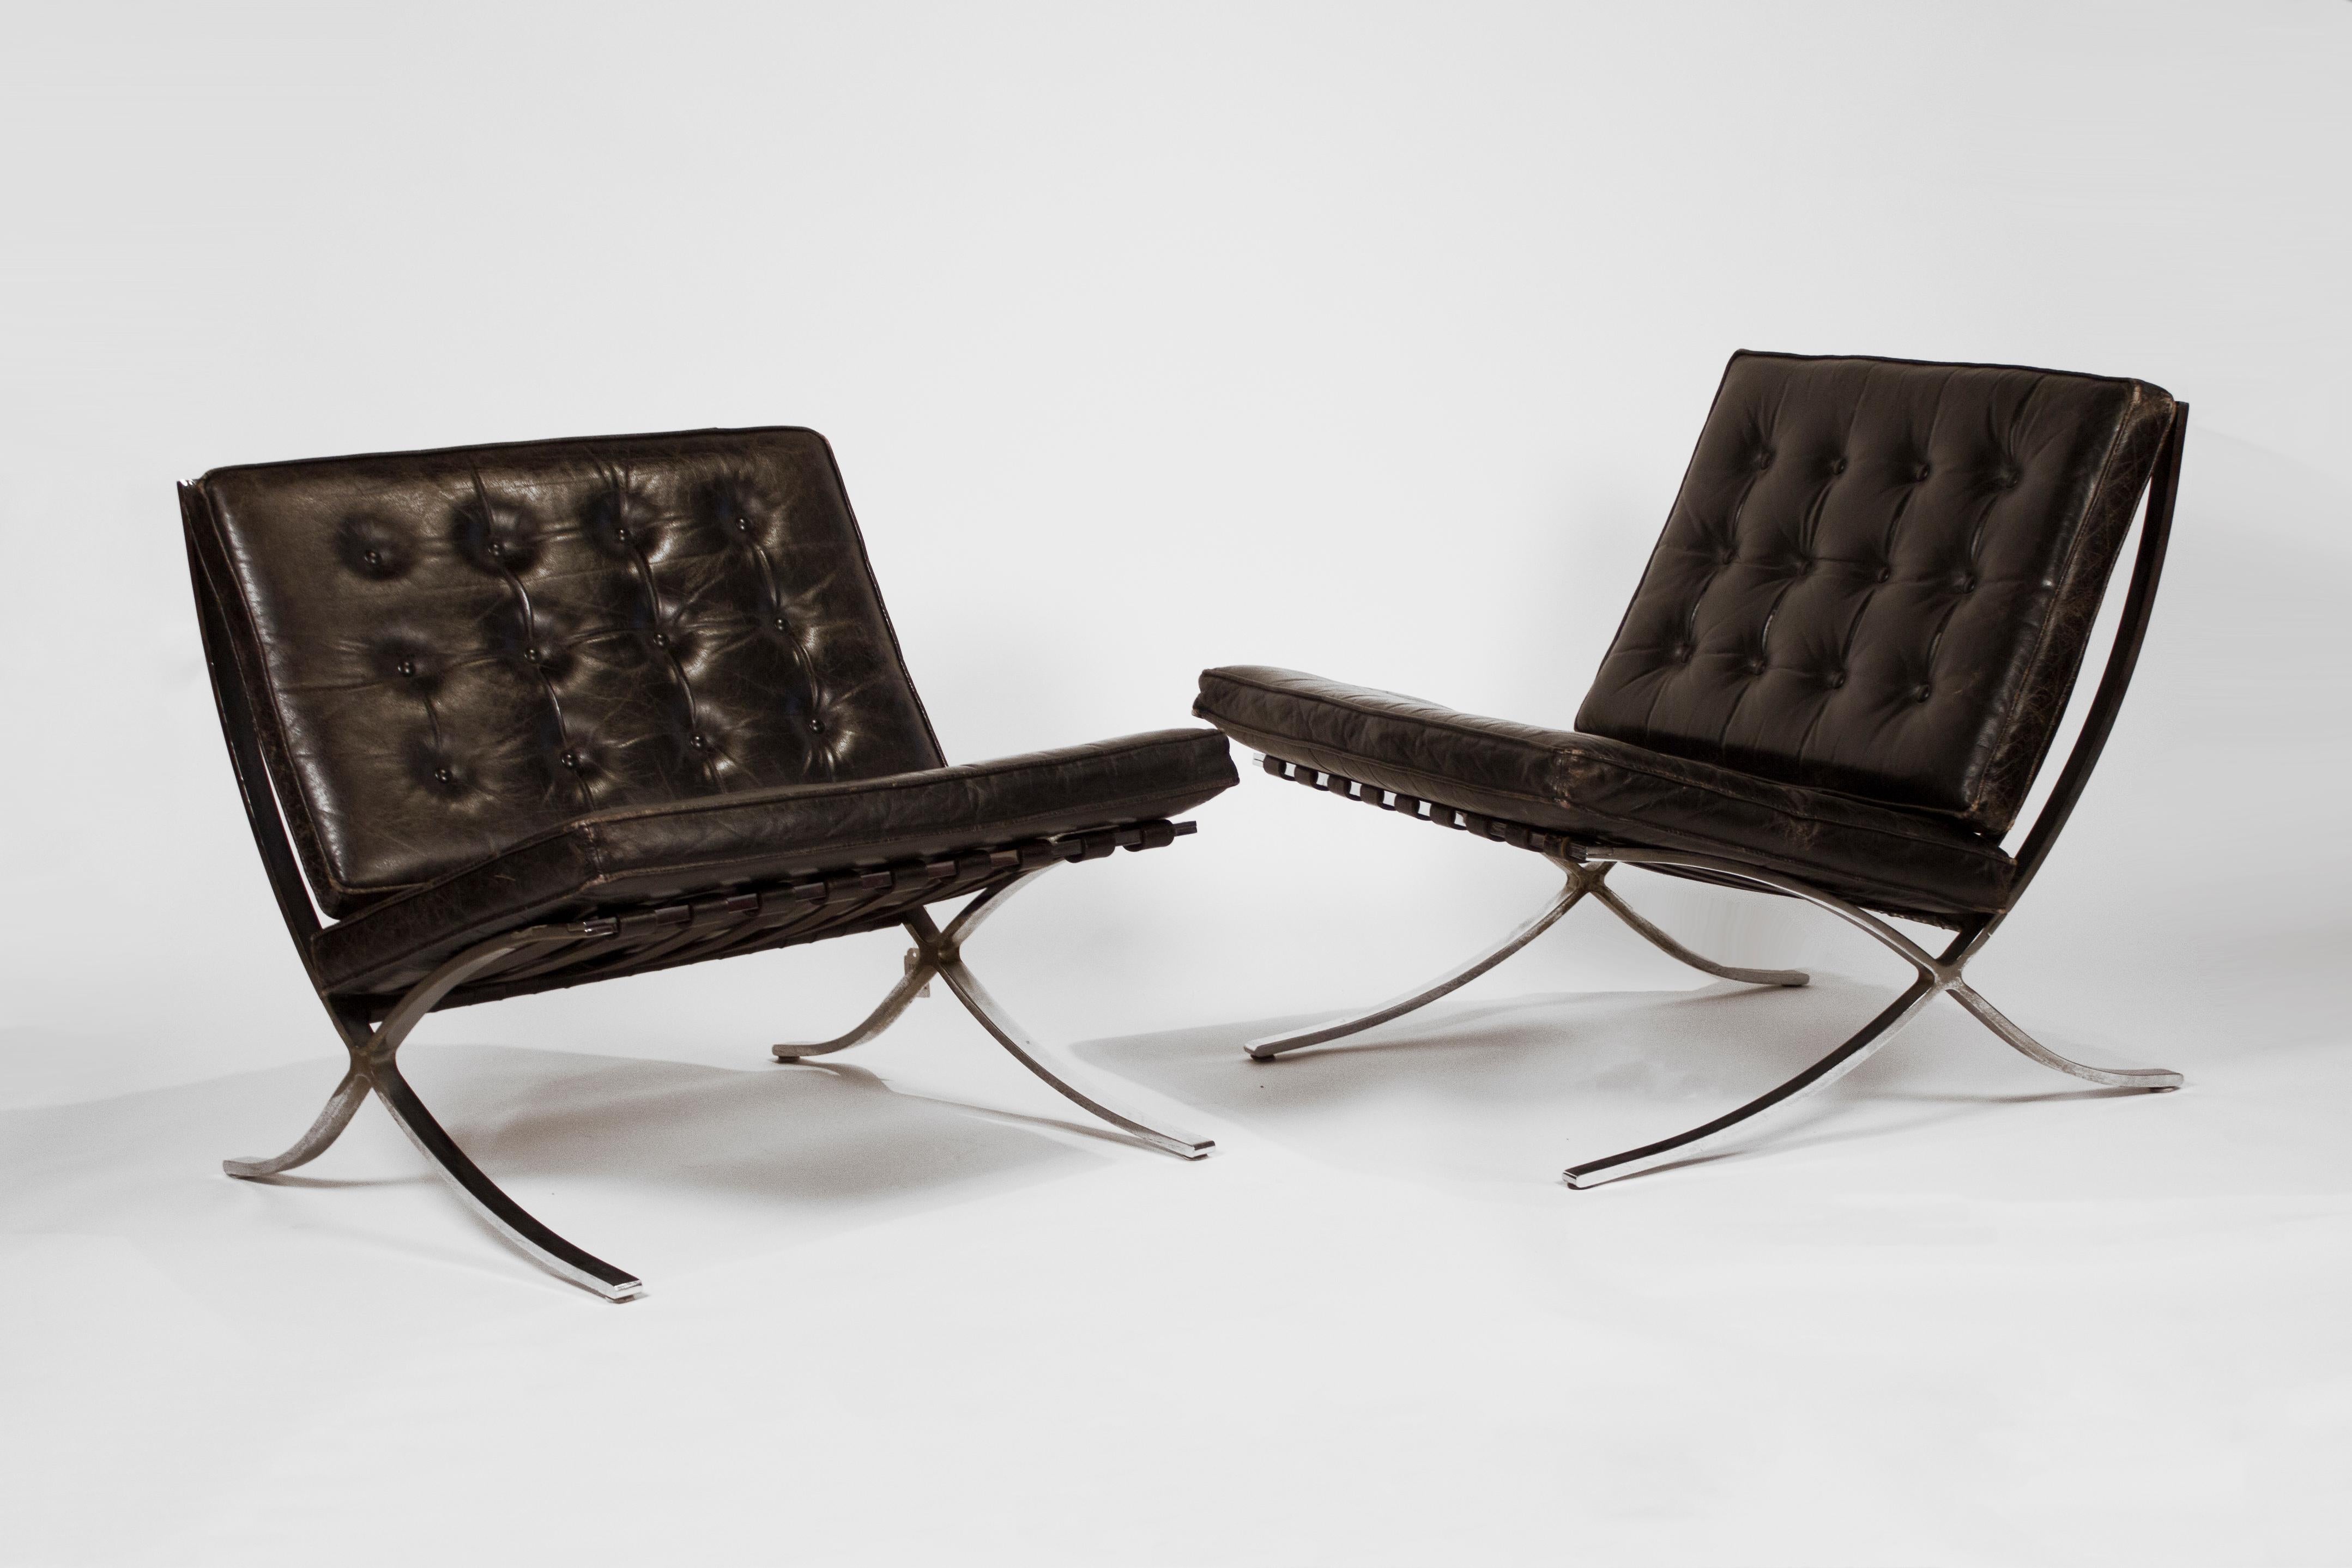 Someone heavily involved in the Mies catalogue raisonne project has personally confirmed that these chairs are in fact authentic Barcelona chairs manufactured by the German Company, Waldemar Stiegler, which produced the flat-steel furniture for